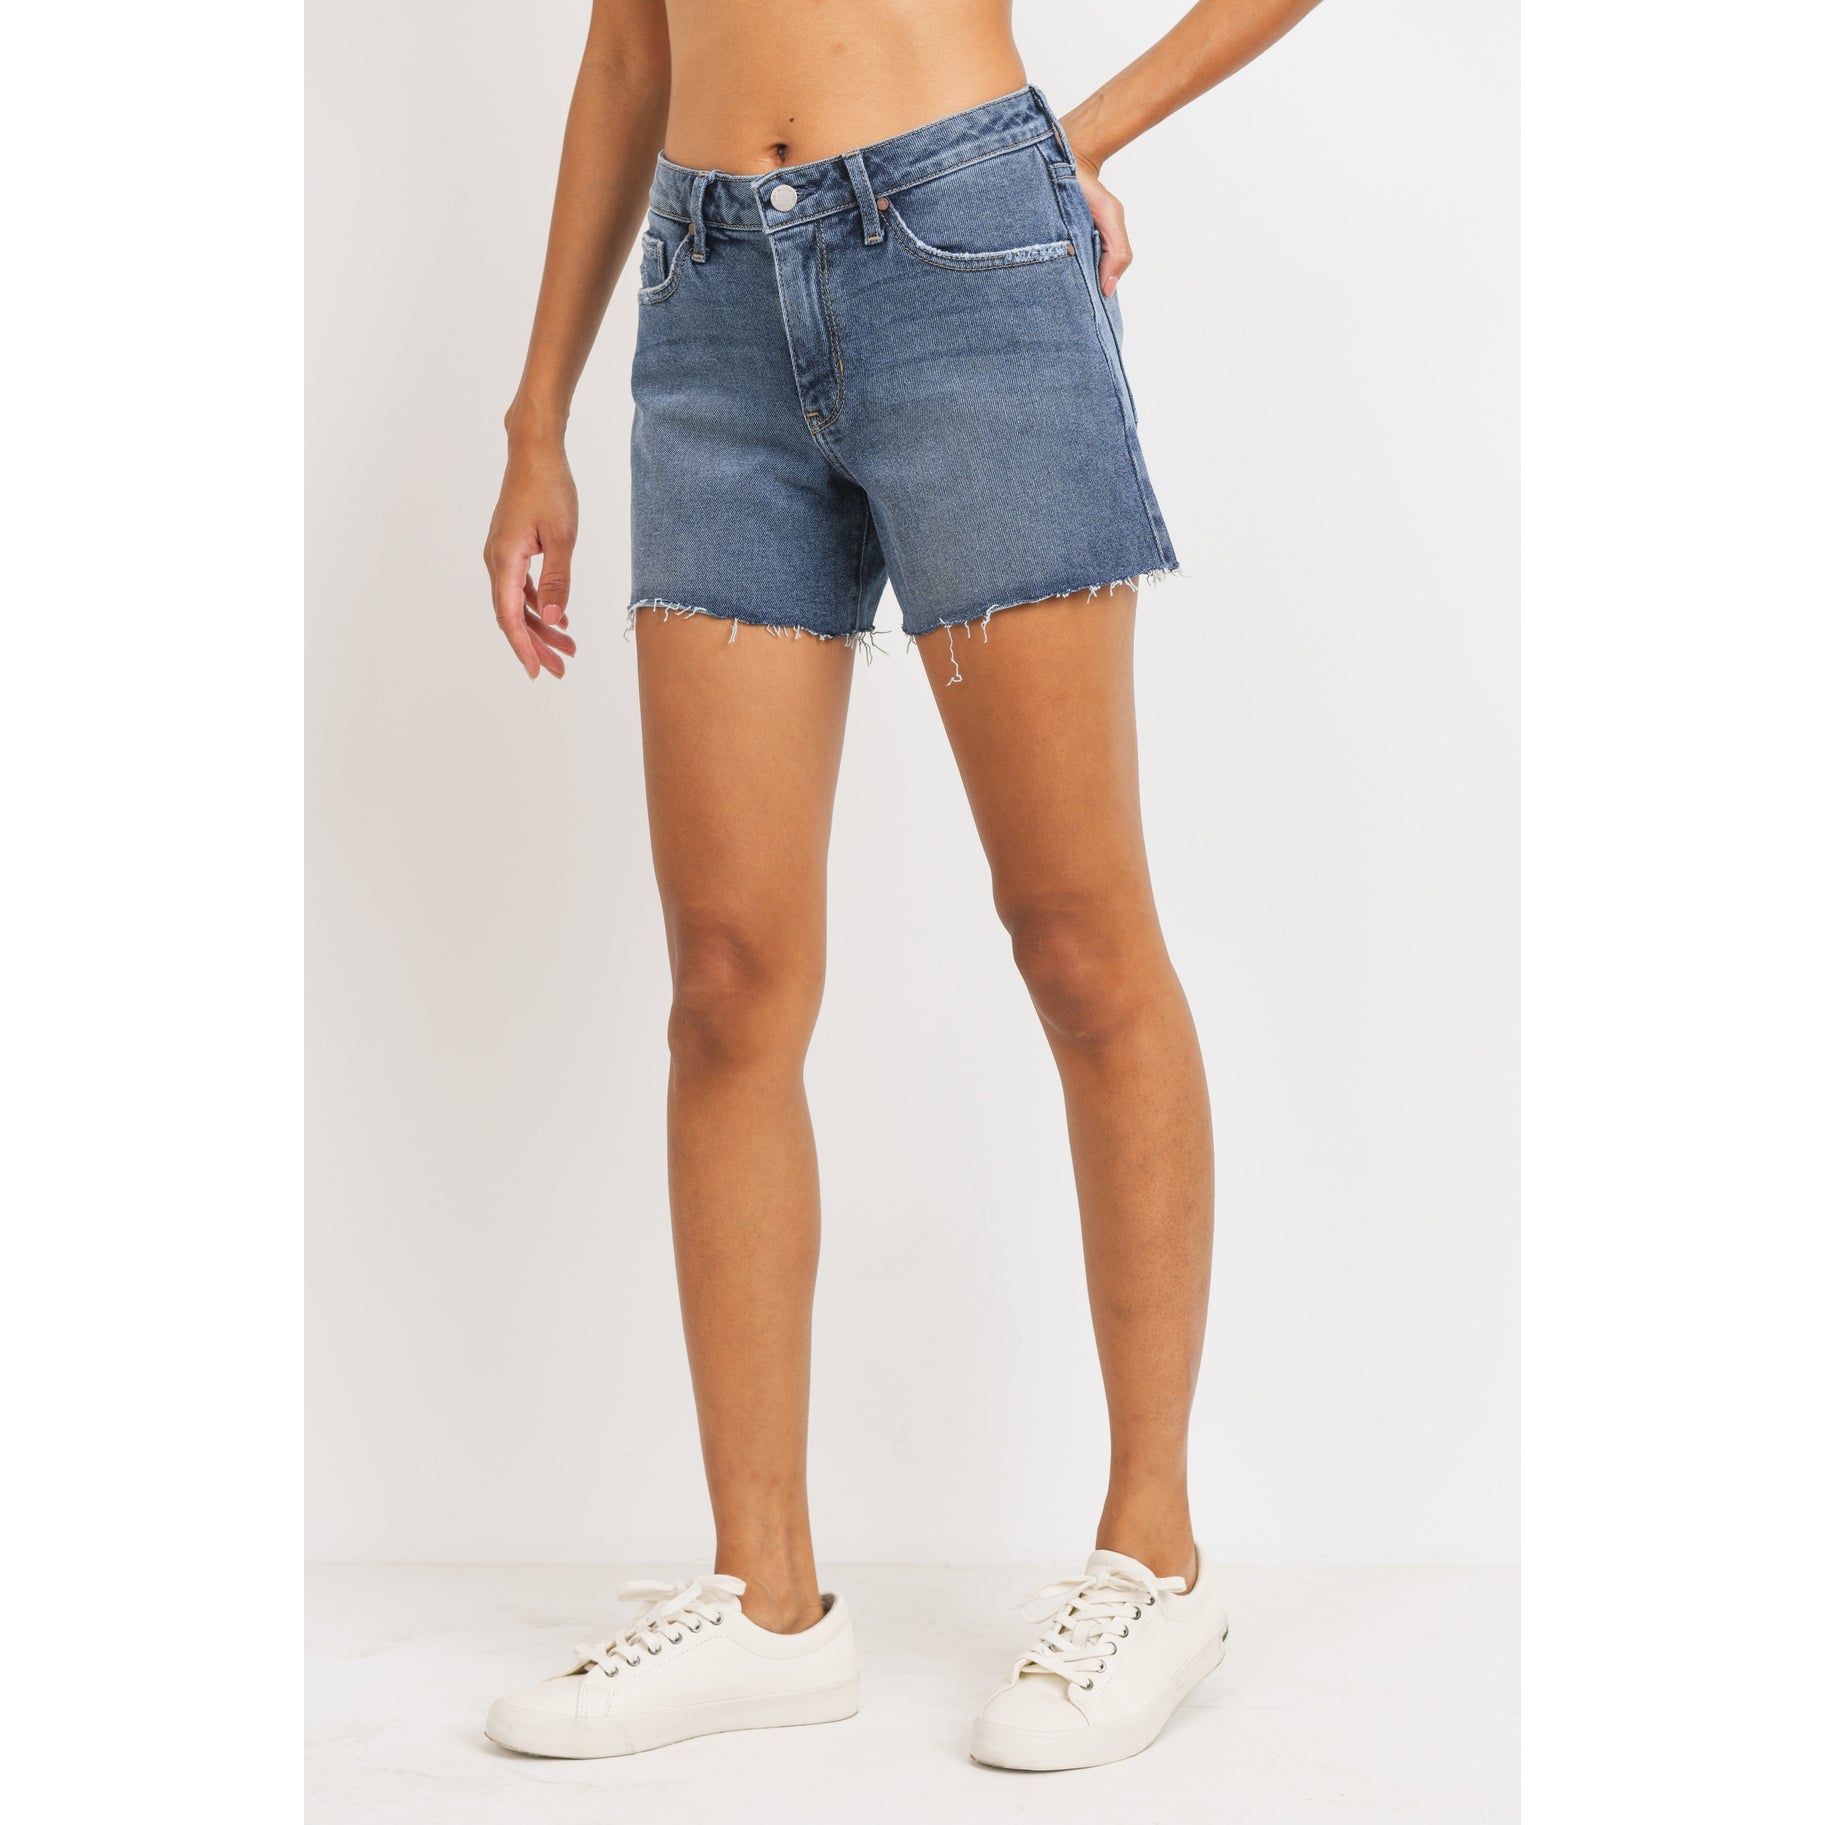 The Channing High Rise A-Line Shorts by Just Black Denim